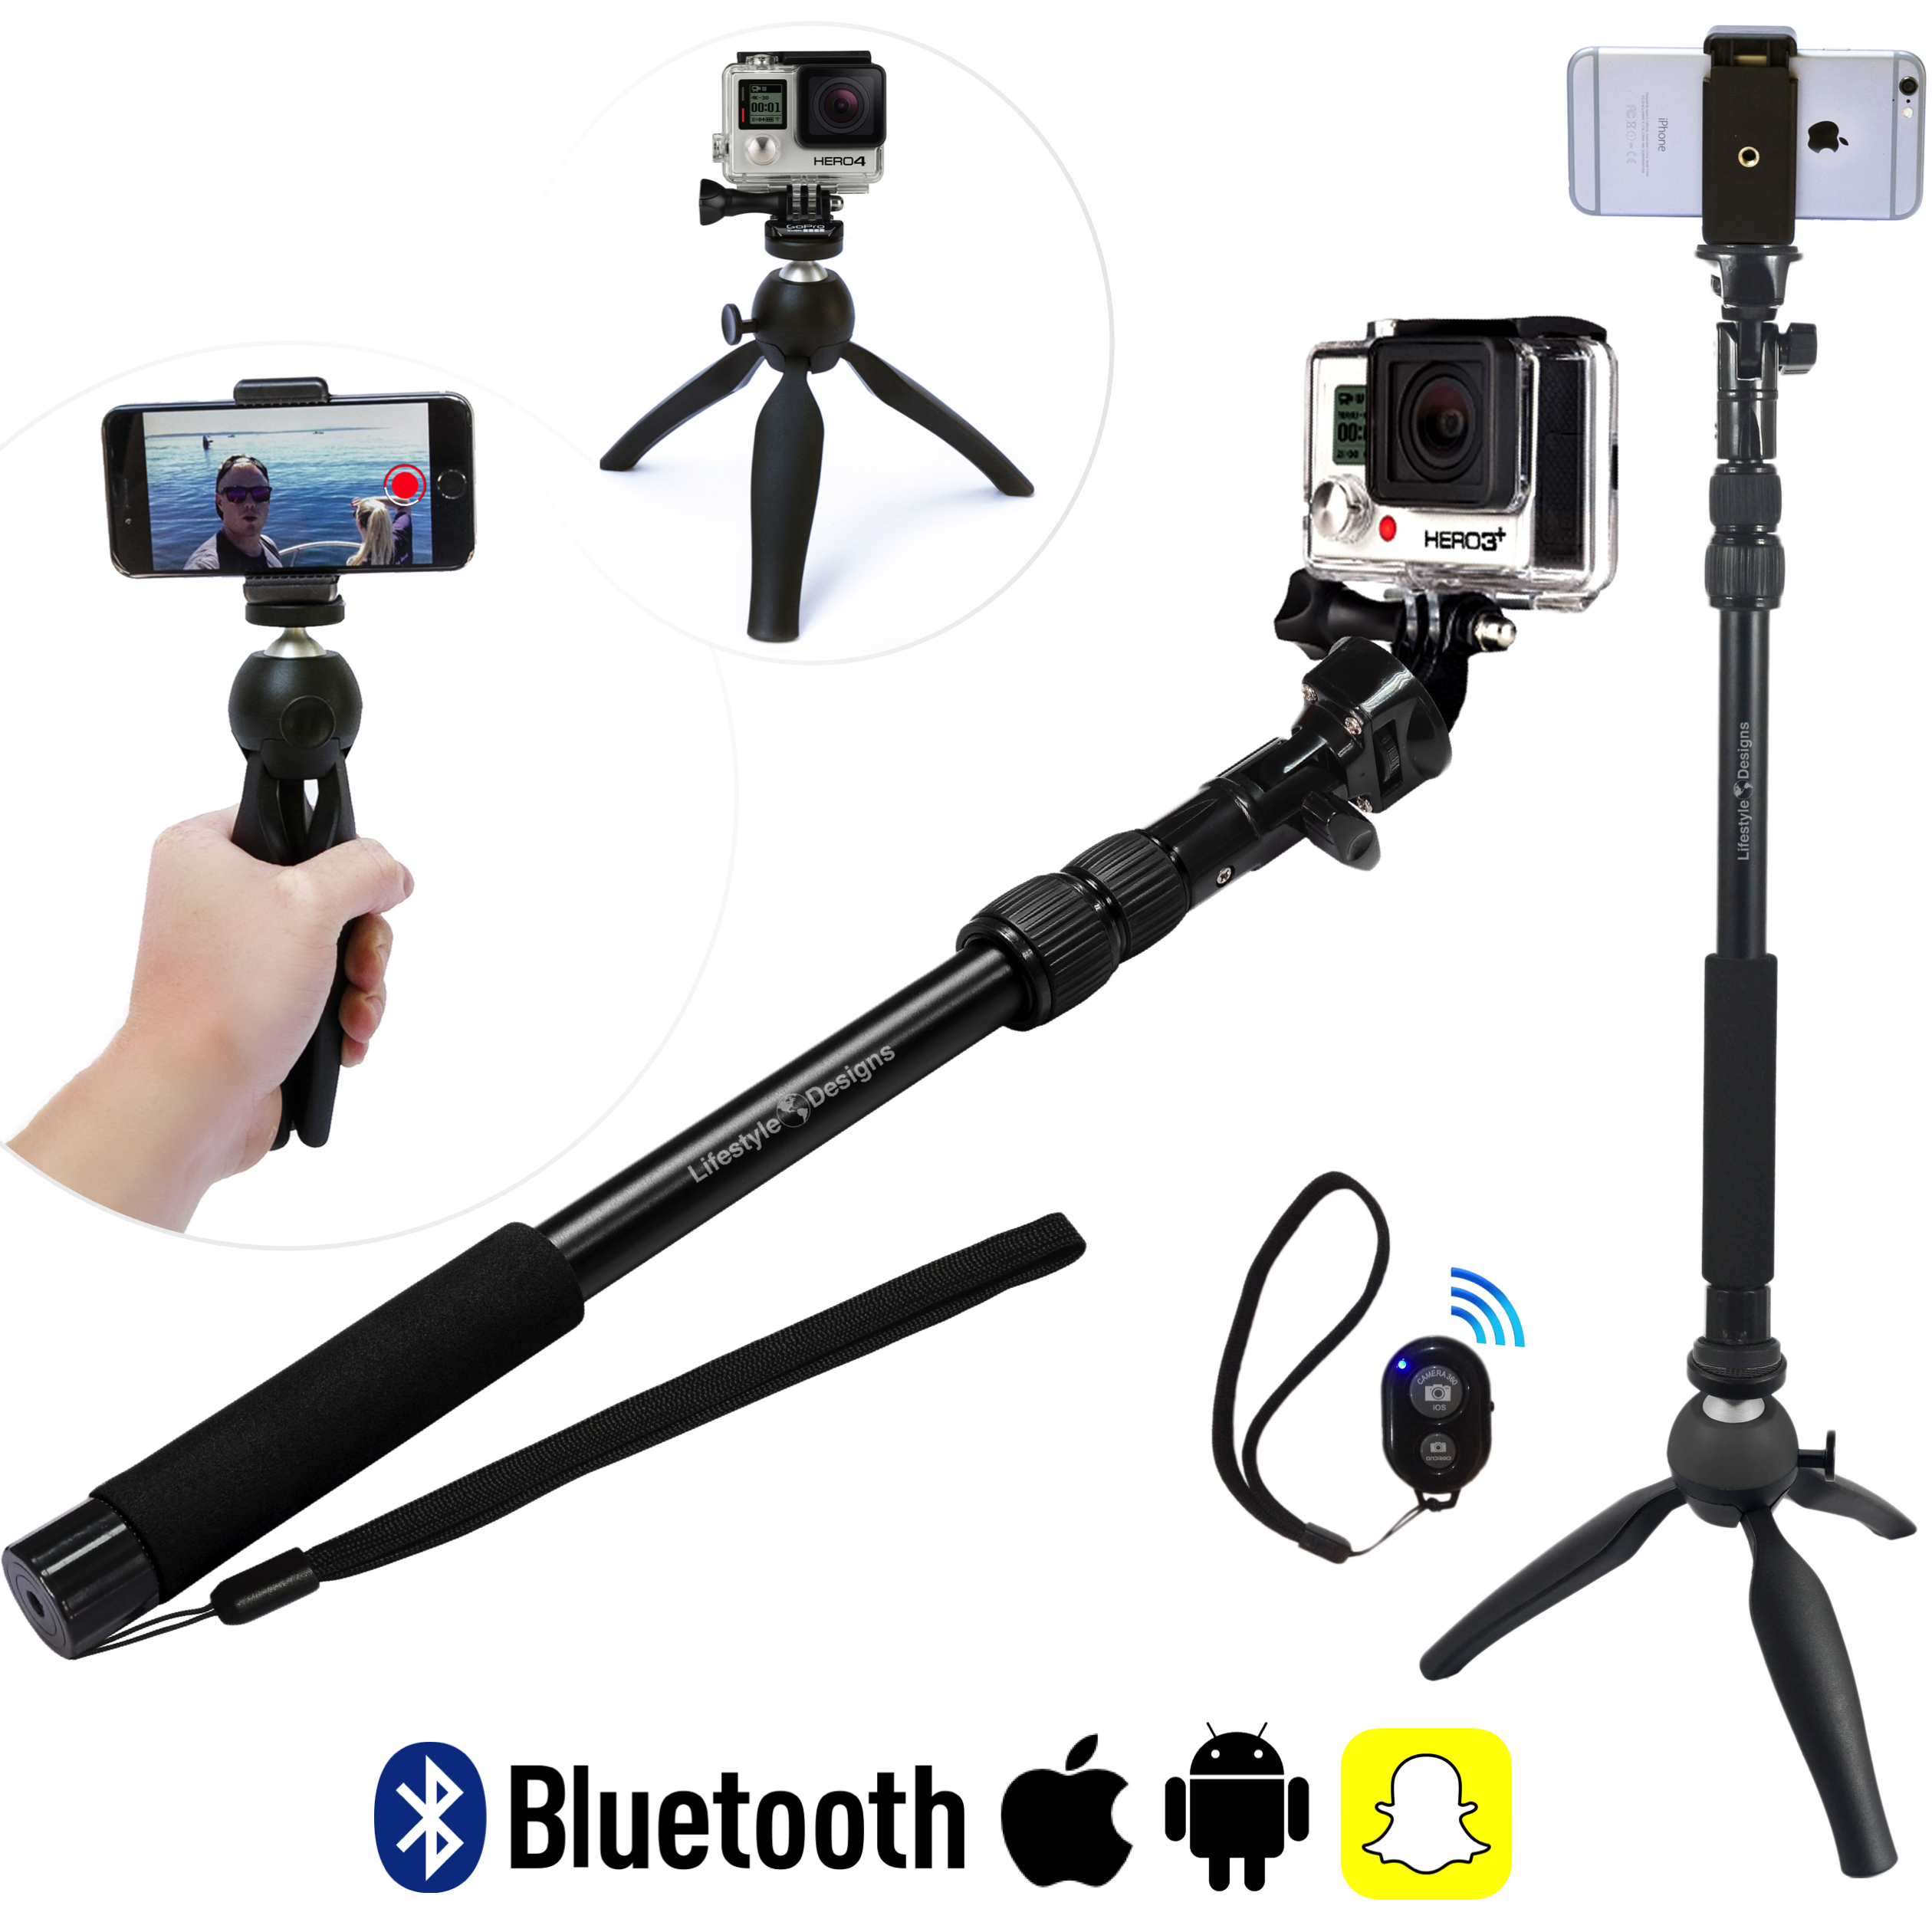 How to use a selfie stick? - The complete guide Whats